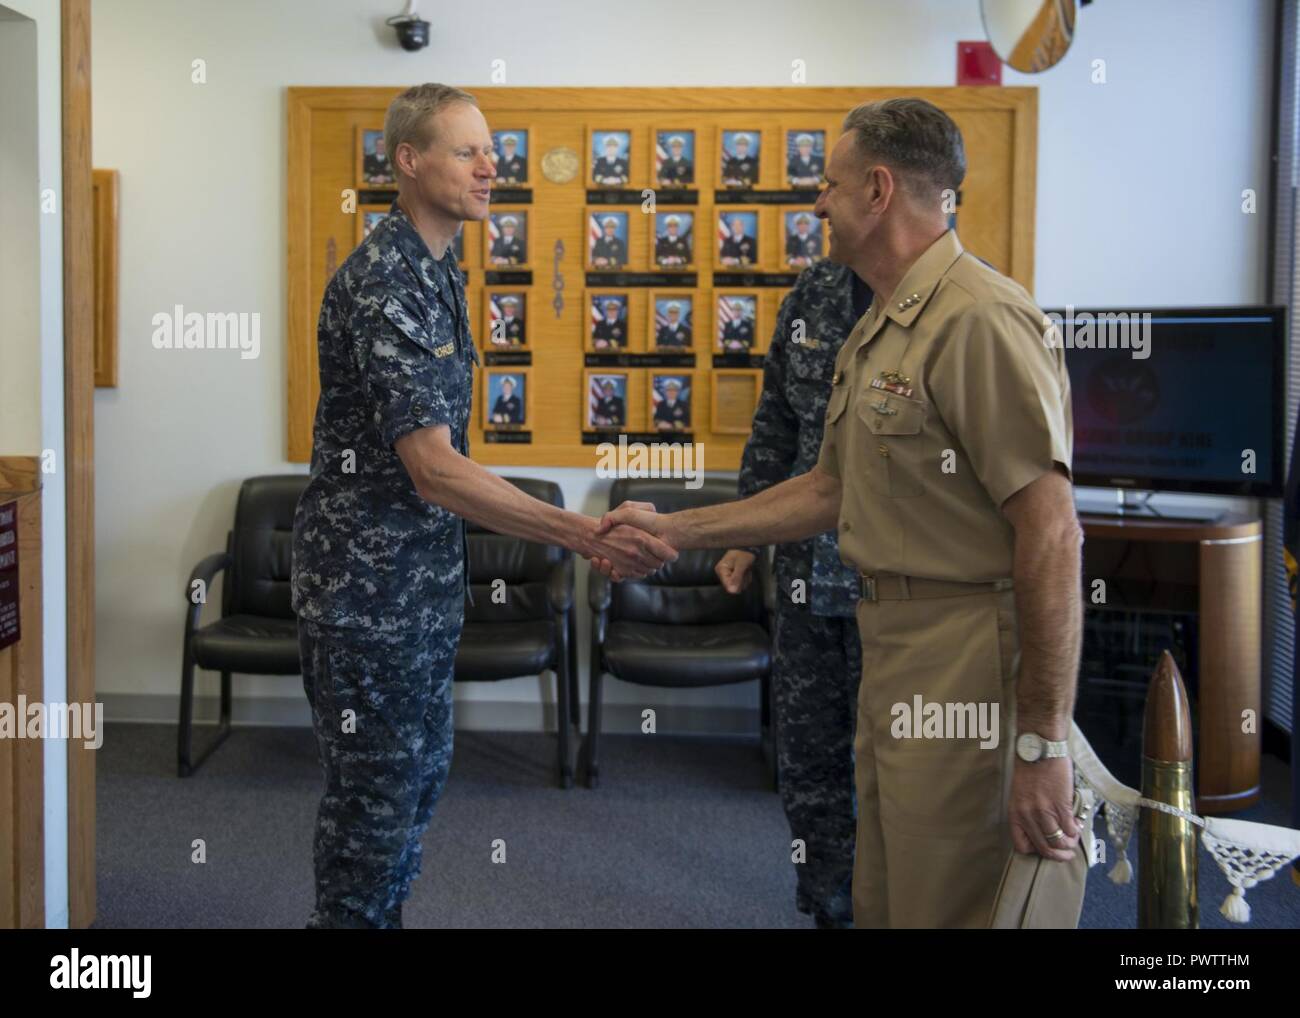 BANGOR, Wash. (June 22, 2017) Capt. Ted Schroeder, chief of staff, Submarine Group (COMSUBGRU) 9, greets Chief of Naval Personnel Vice Adm. Robert Burke on the quarterdeck of COMSUBGRU-9 while visiting Naval Base Kitsap (NBK) Bangor. During his visit, he conducted four separate all hands calls at NBK Bangor and NBK Bremerton to answer Sailor’s questions. ( Stock Photo